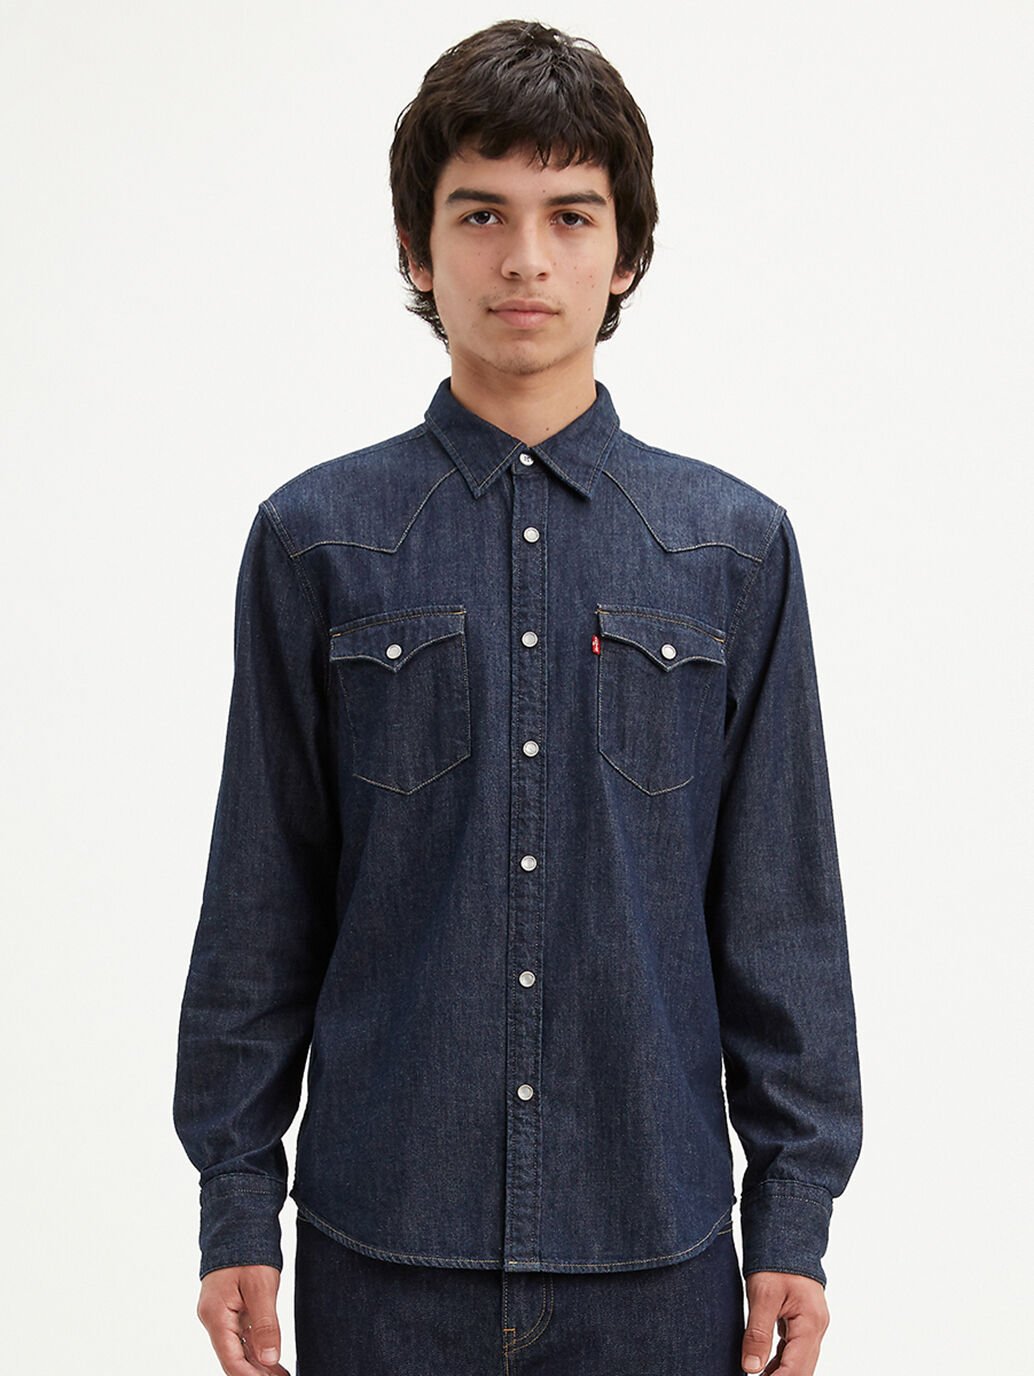 LEVI’S Barstow Denim Western Shirt ‘Rinse’ – Route66.co.nz